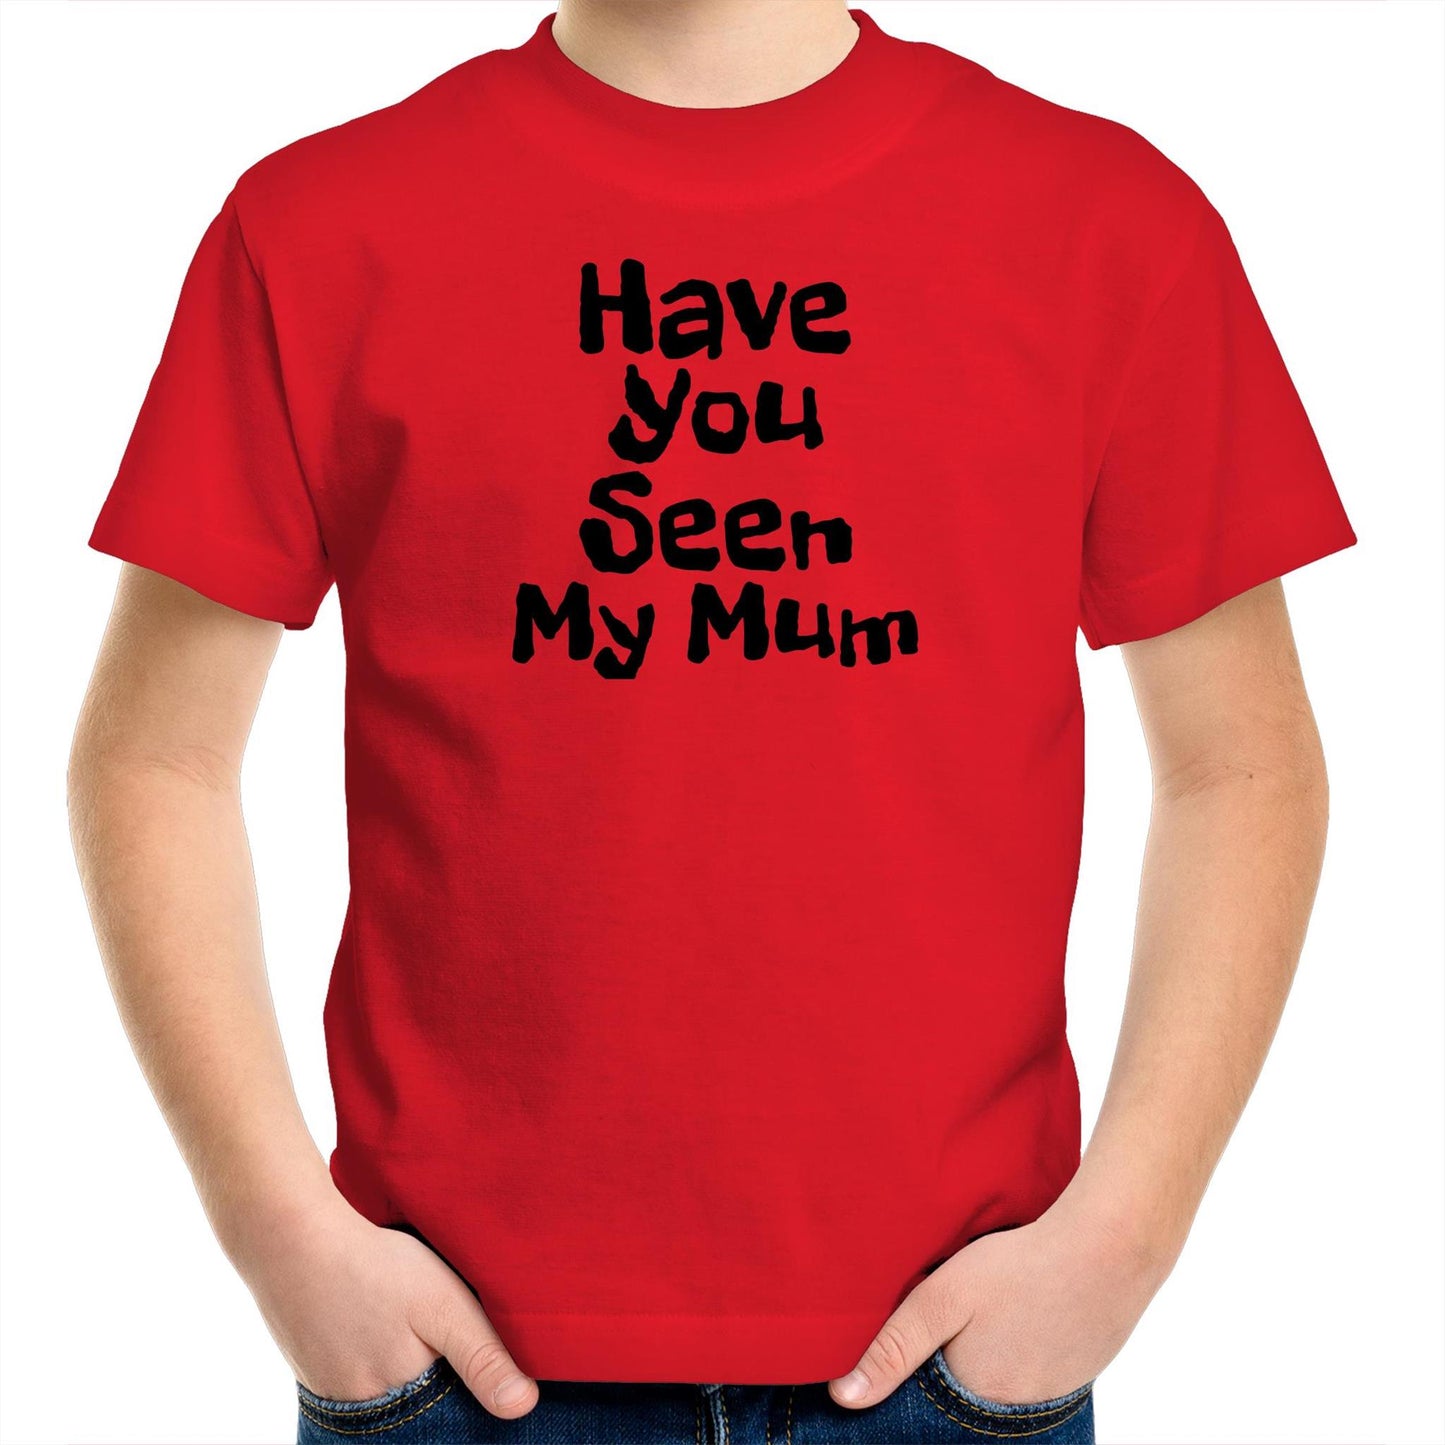 Have You Seen My Mum Kids Tee